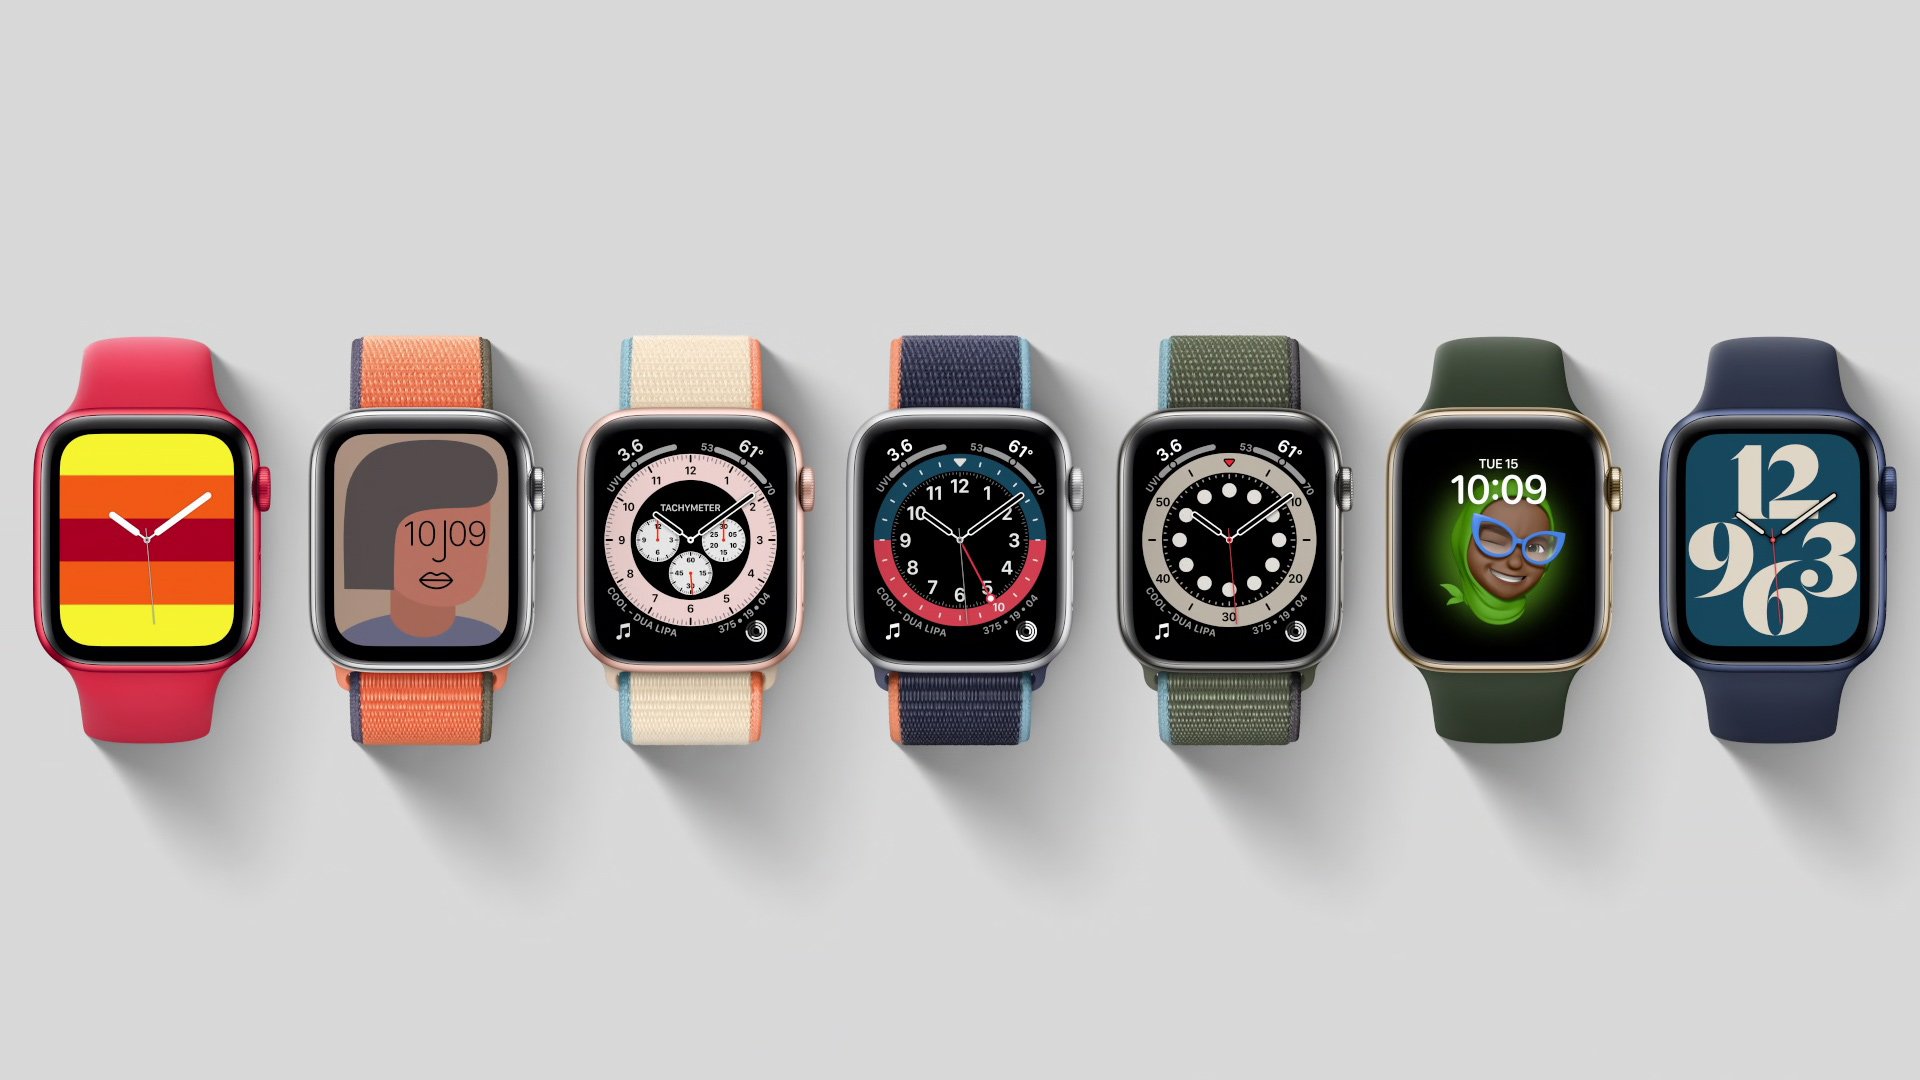 Post custom watch faces for Apple Watch [Merged] | Page 11 | MacRumors Forums